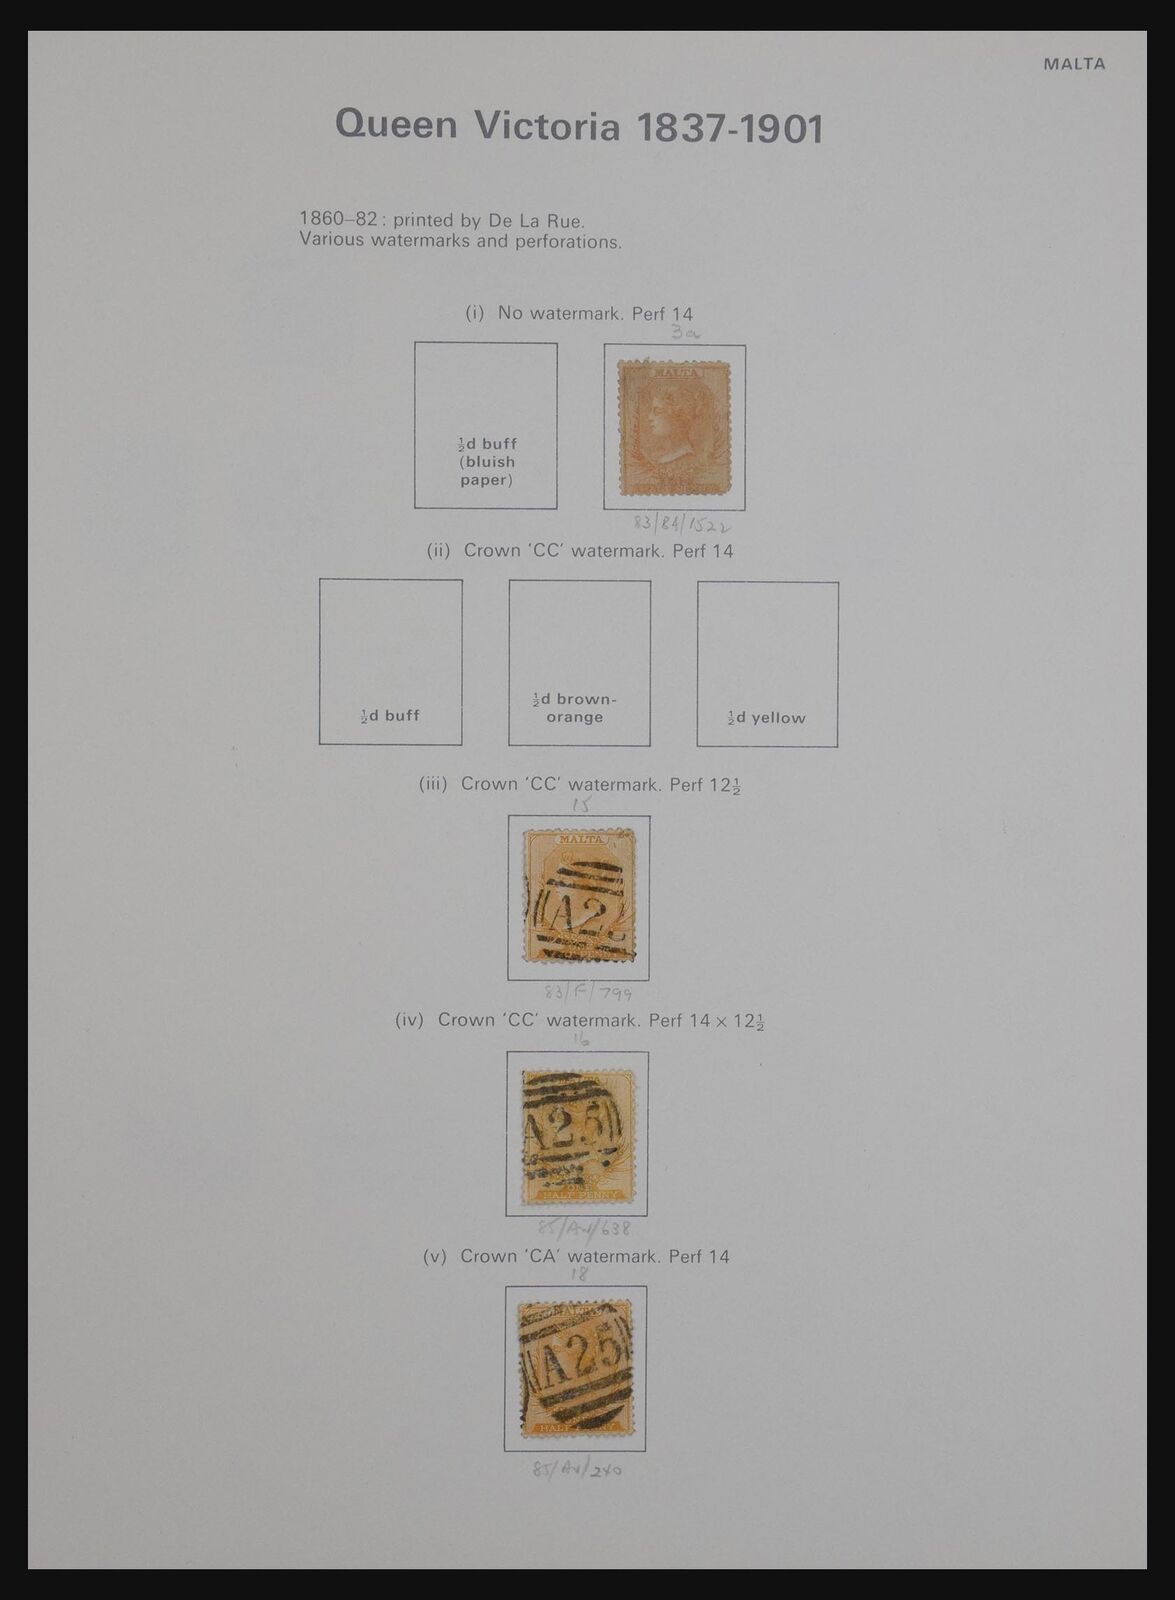 Lot 30959 Collection stamps of Malta 1860-1985.